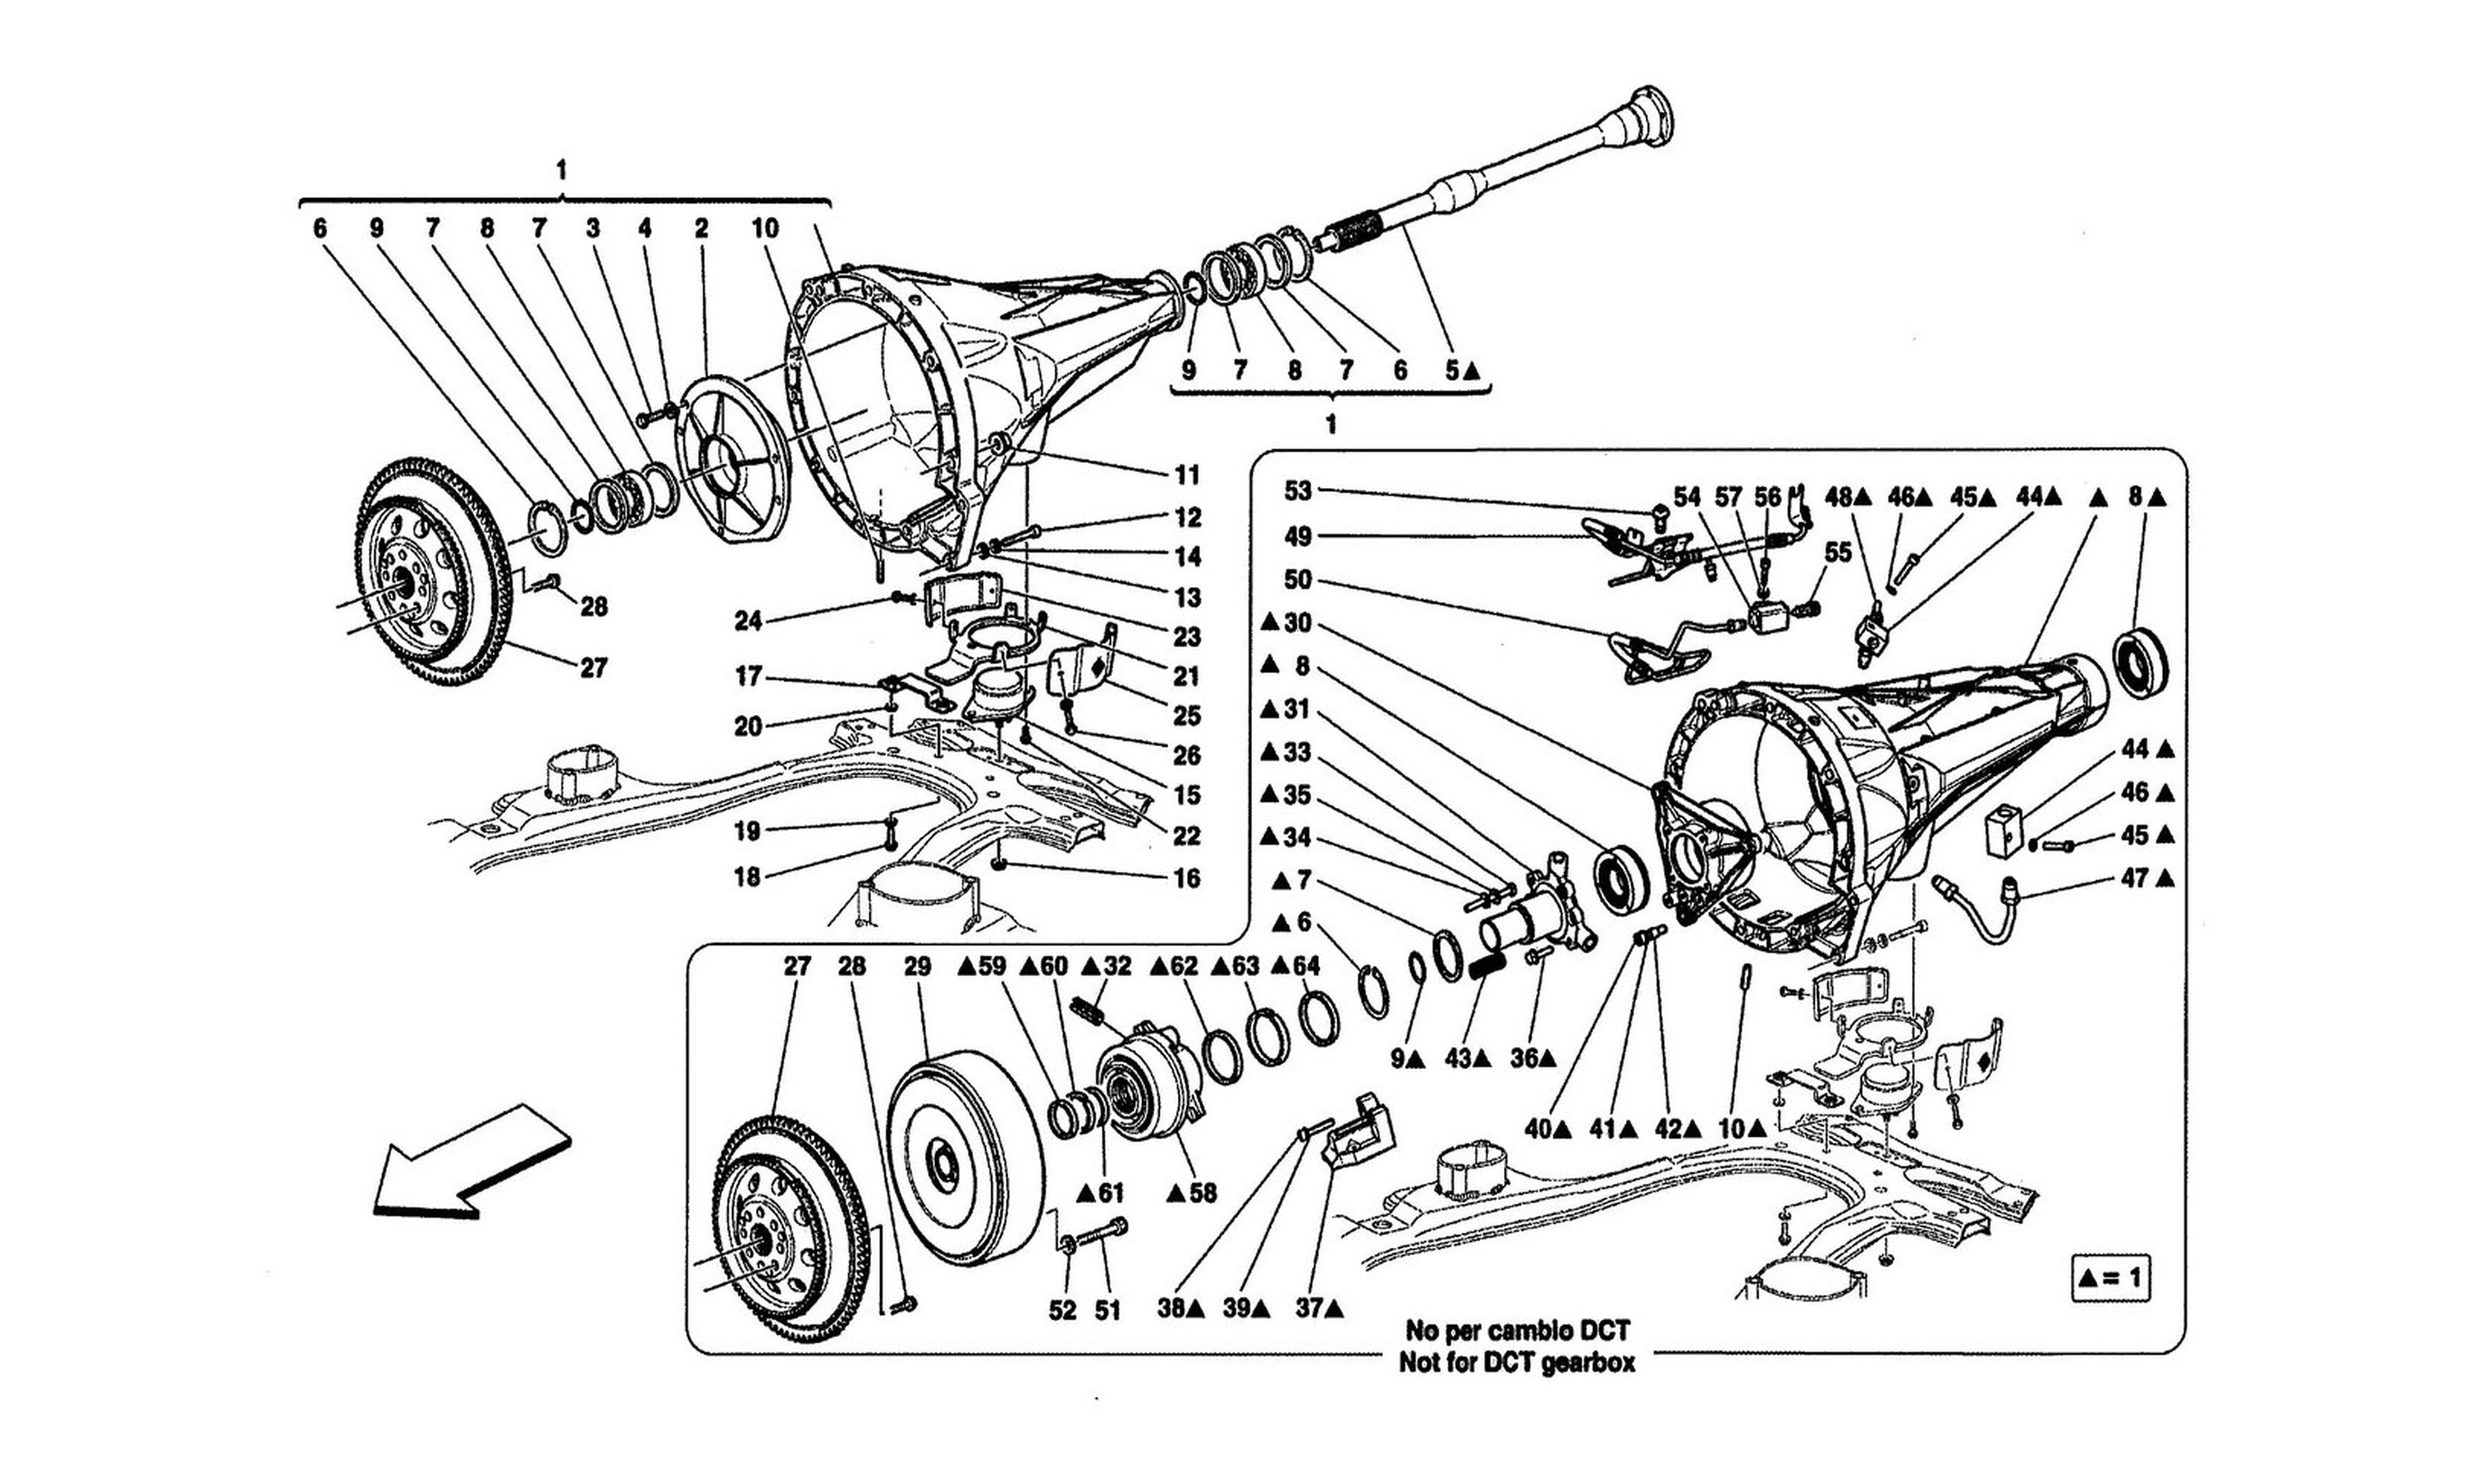 Schematic: Transmission Housing For Dct Gearbox